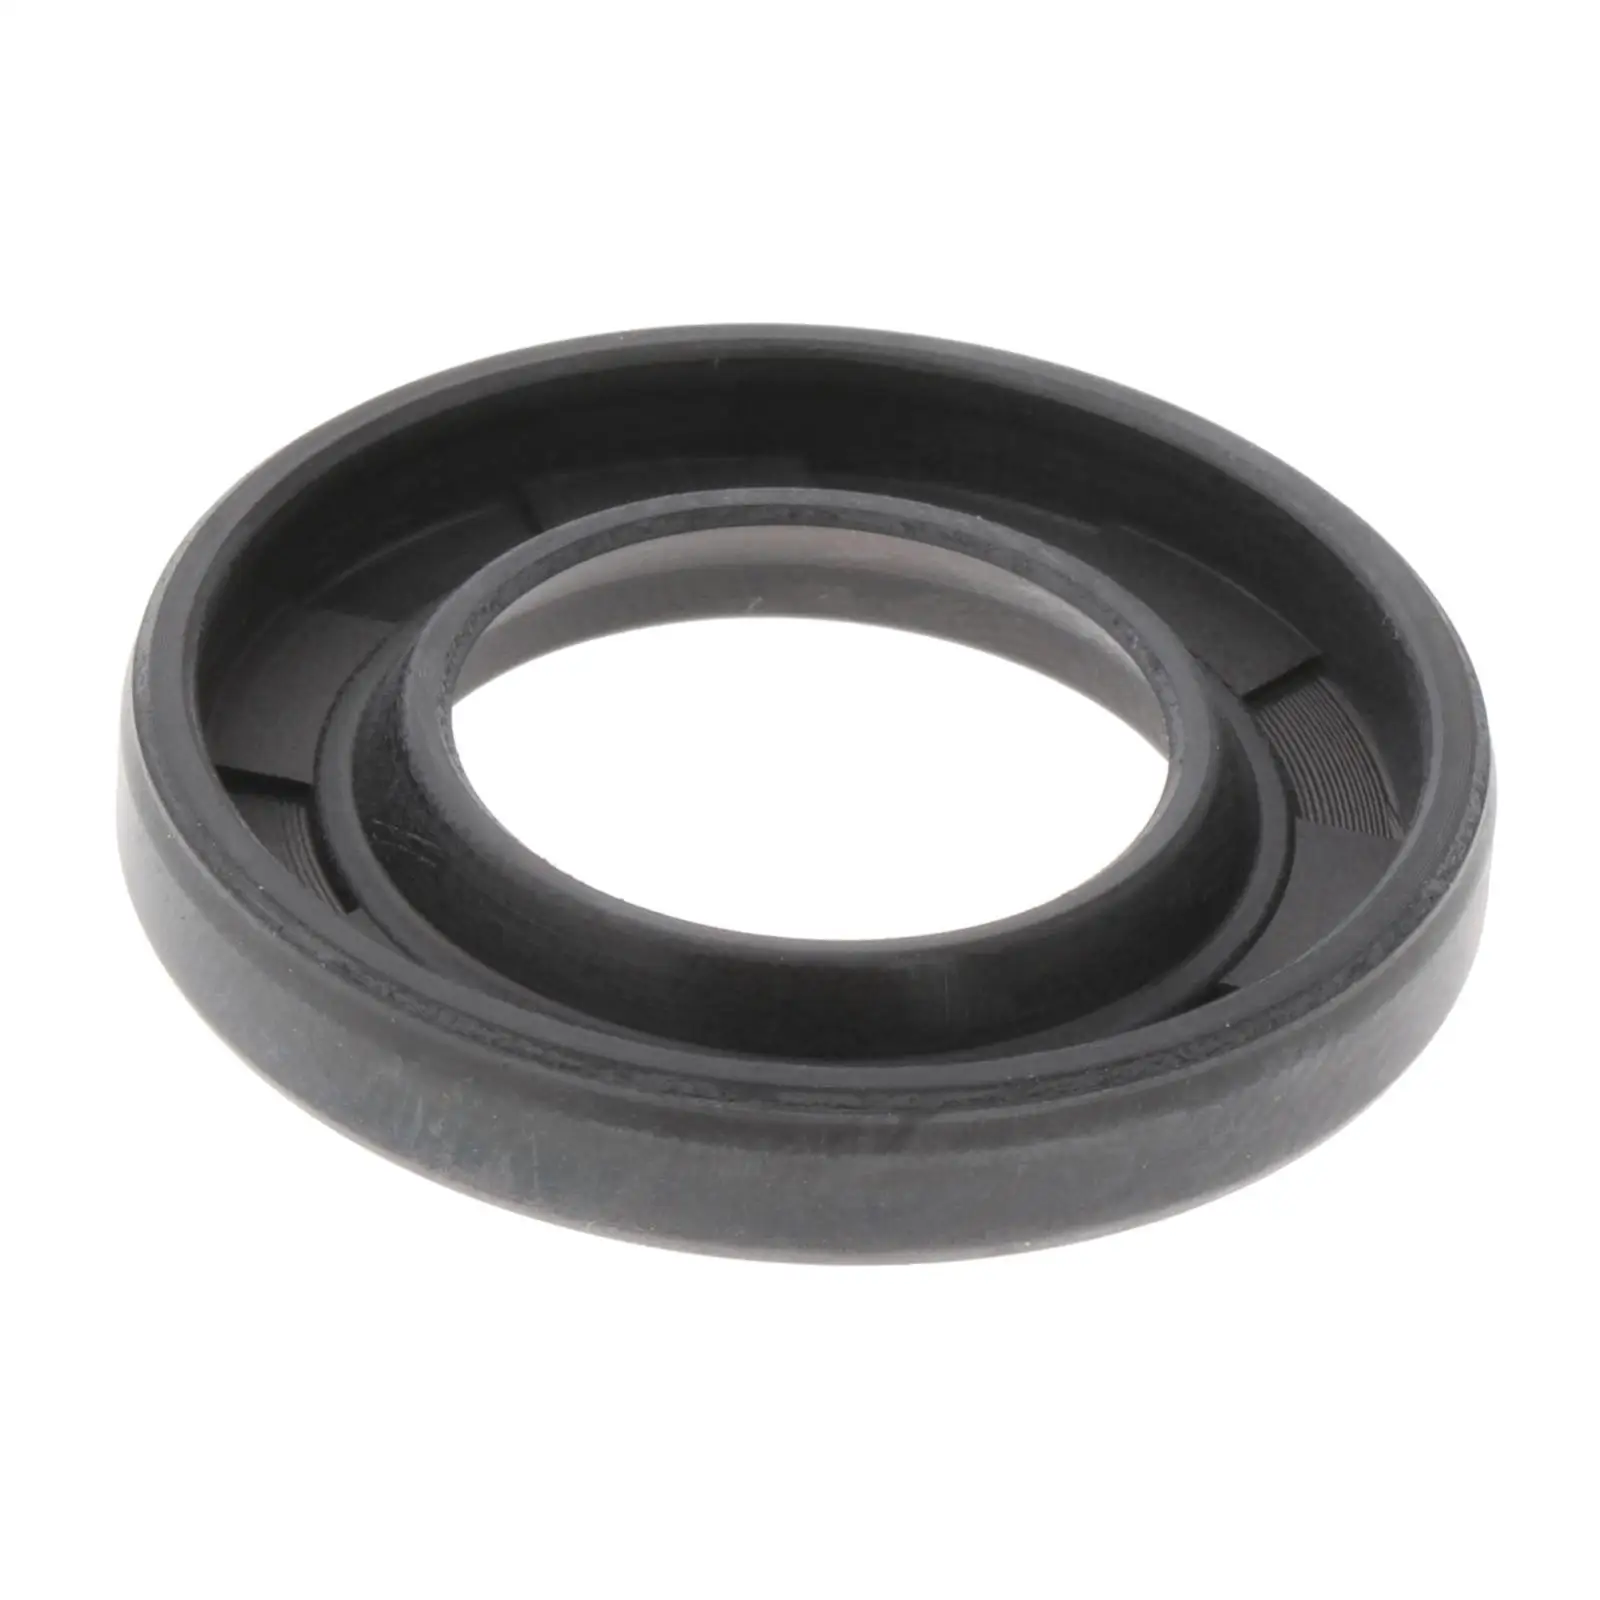 Oil Seal Spare Parts for Yamaha Outboard Motor 60HP 70HP Outboard Engine 2 Stroke